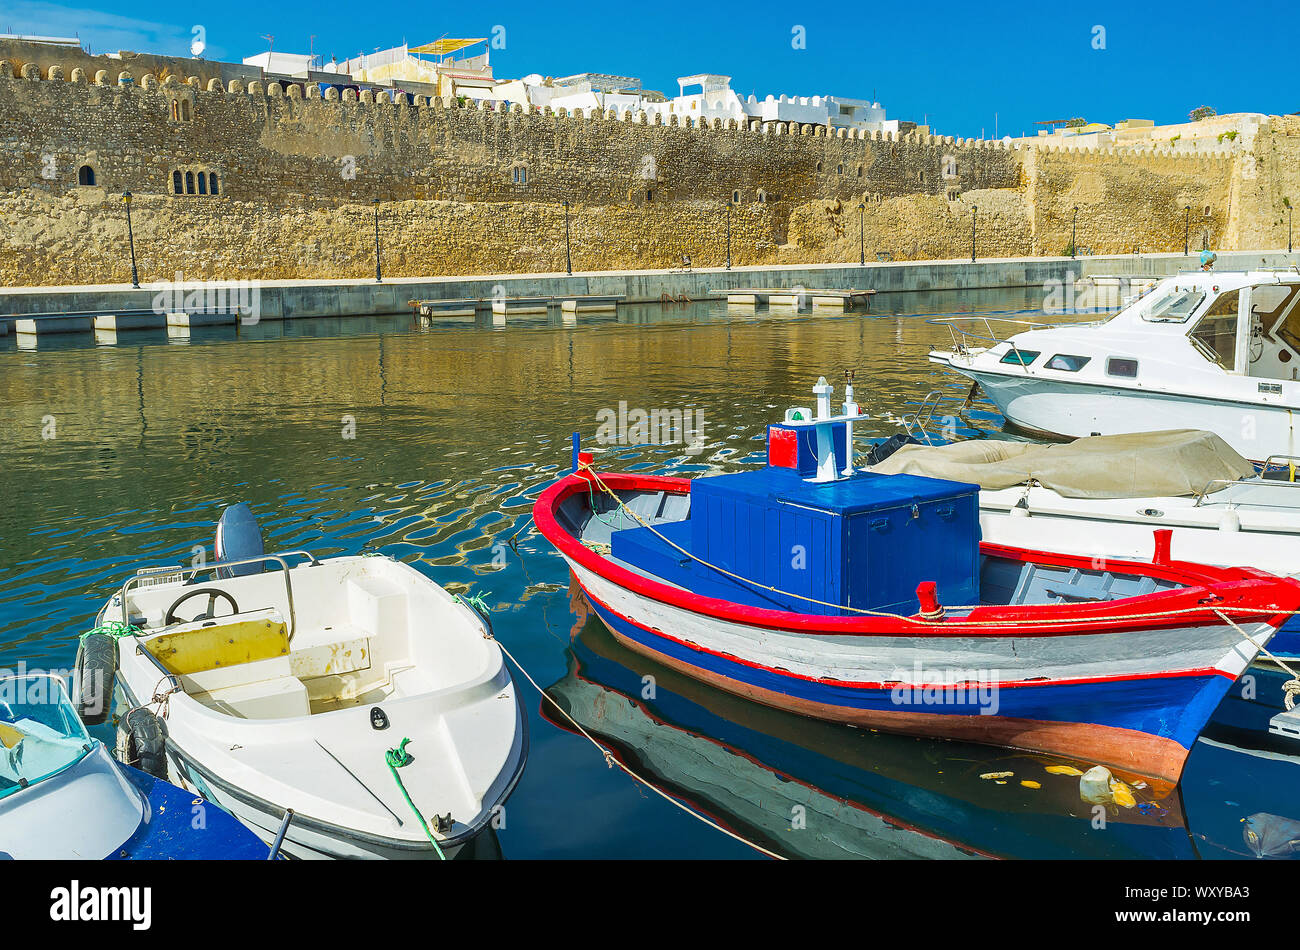 The view on colorful fishing boats, moored in port, and the medieval wall of Kasbah fortress on the background, Bizerte, Tunisia Stock Photo